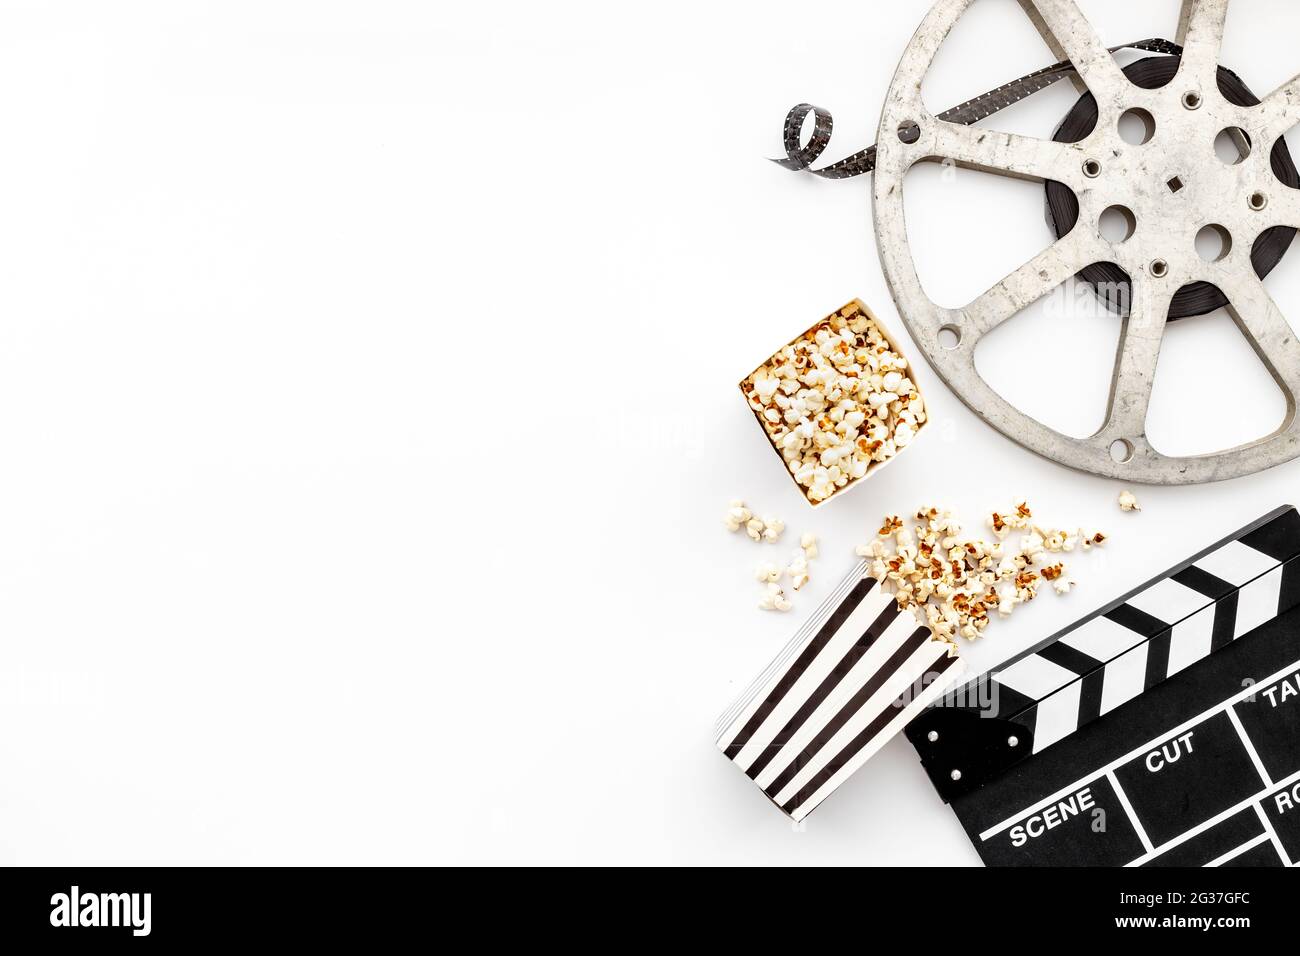 Movie Film Reel With Clapperboard And Popcorn Cinema Concept Stock Photo Alamy